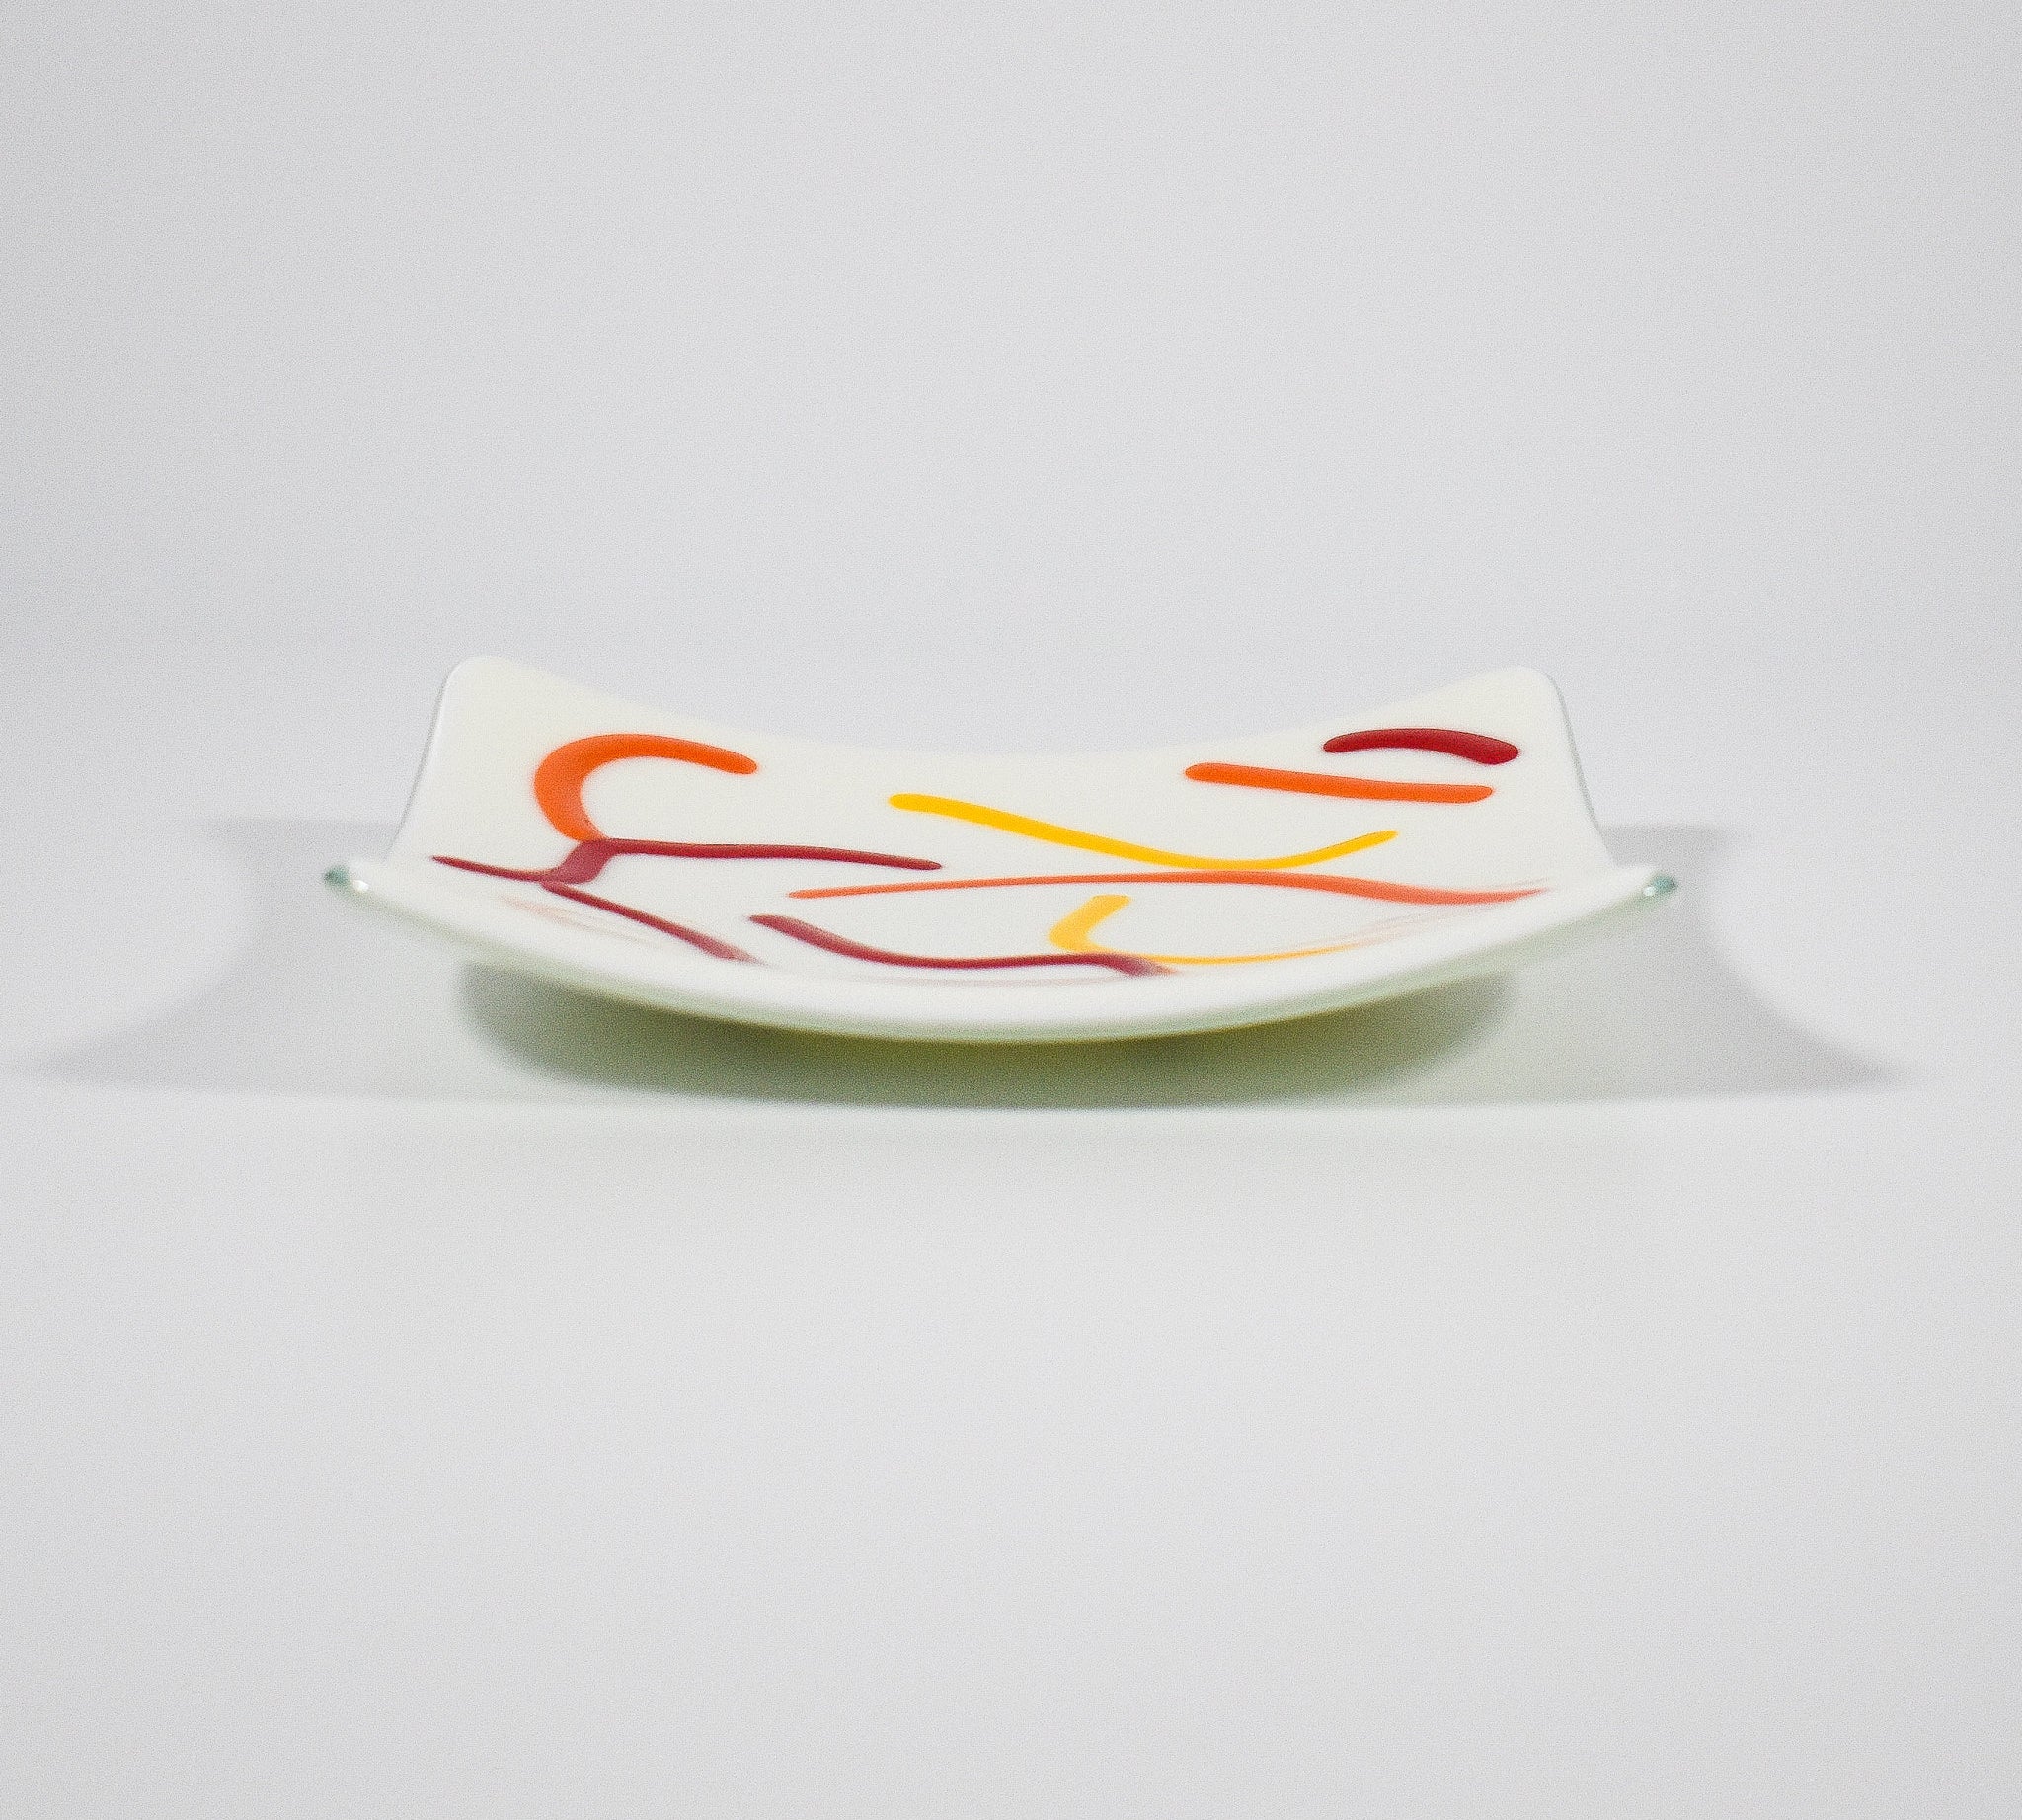 Small, square fused glass tray is cream with orange, red and yellow curve design.